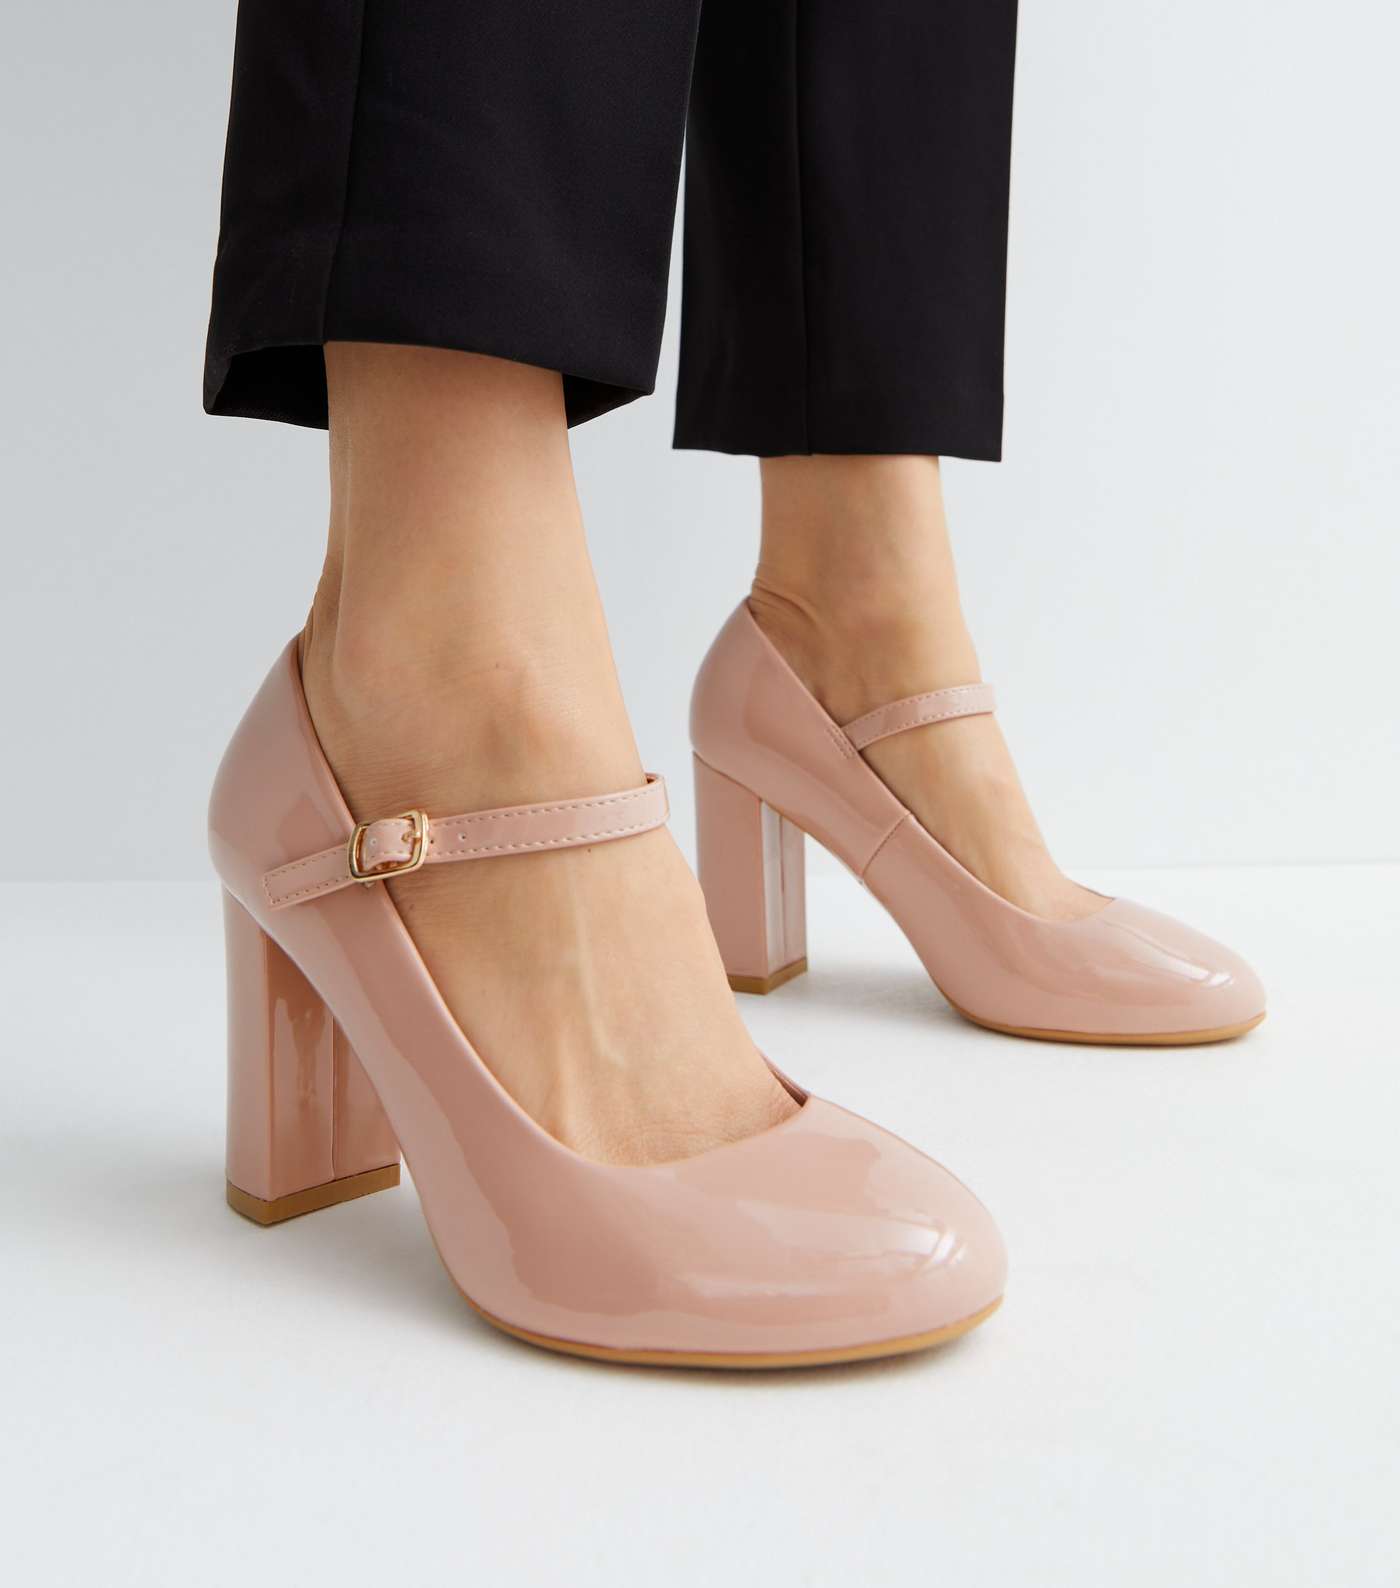 Wide Fit Pale Pink Patent Block Heel Mary Jane Shoes Image 2